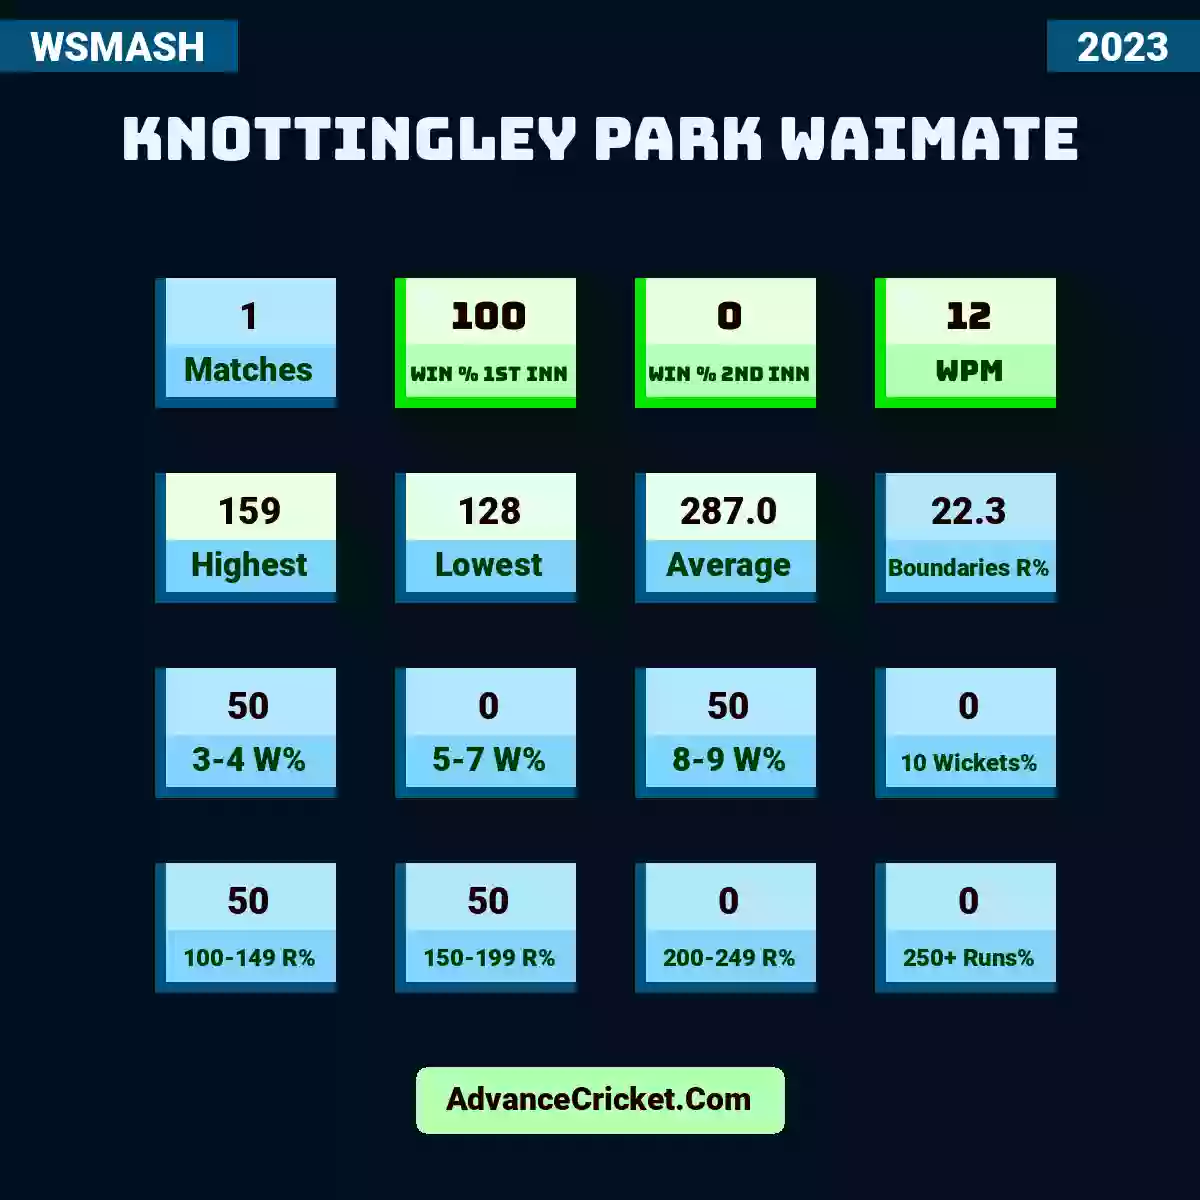 Image showing Knottingley Park Waimate with Matches: 1, Win % 1st Inn: 100, Win % 2nd Inn: 0, WPM: 12, Highest: 159, Lowest: 128, Average: 287.0, Boundaries R%: 22.3, 3-4 W%: 50, 5-7 W%: 0, 8-9 W%: 50, 10 Wickets%: 0, 100-149 R%: 50, 150-199 R%: 50, 200-249 R%: 0, 250+ Runs%: 0.